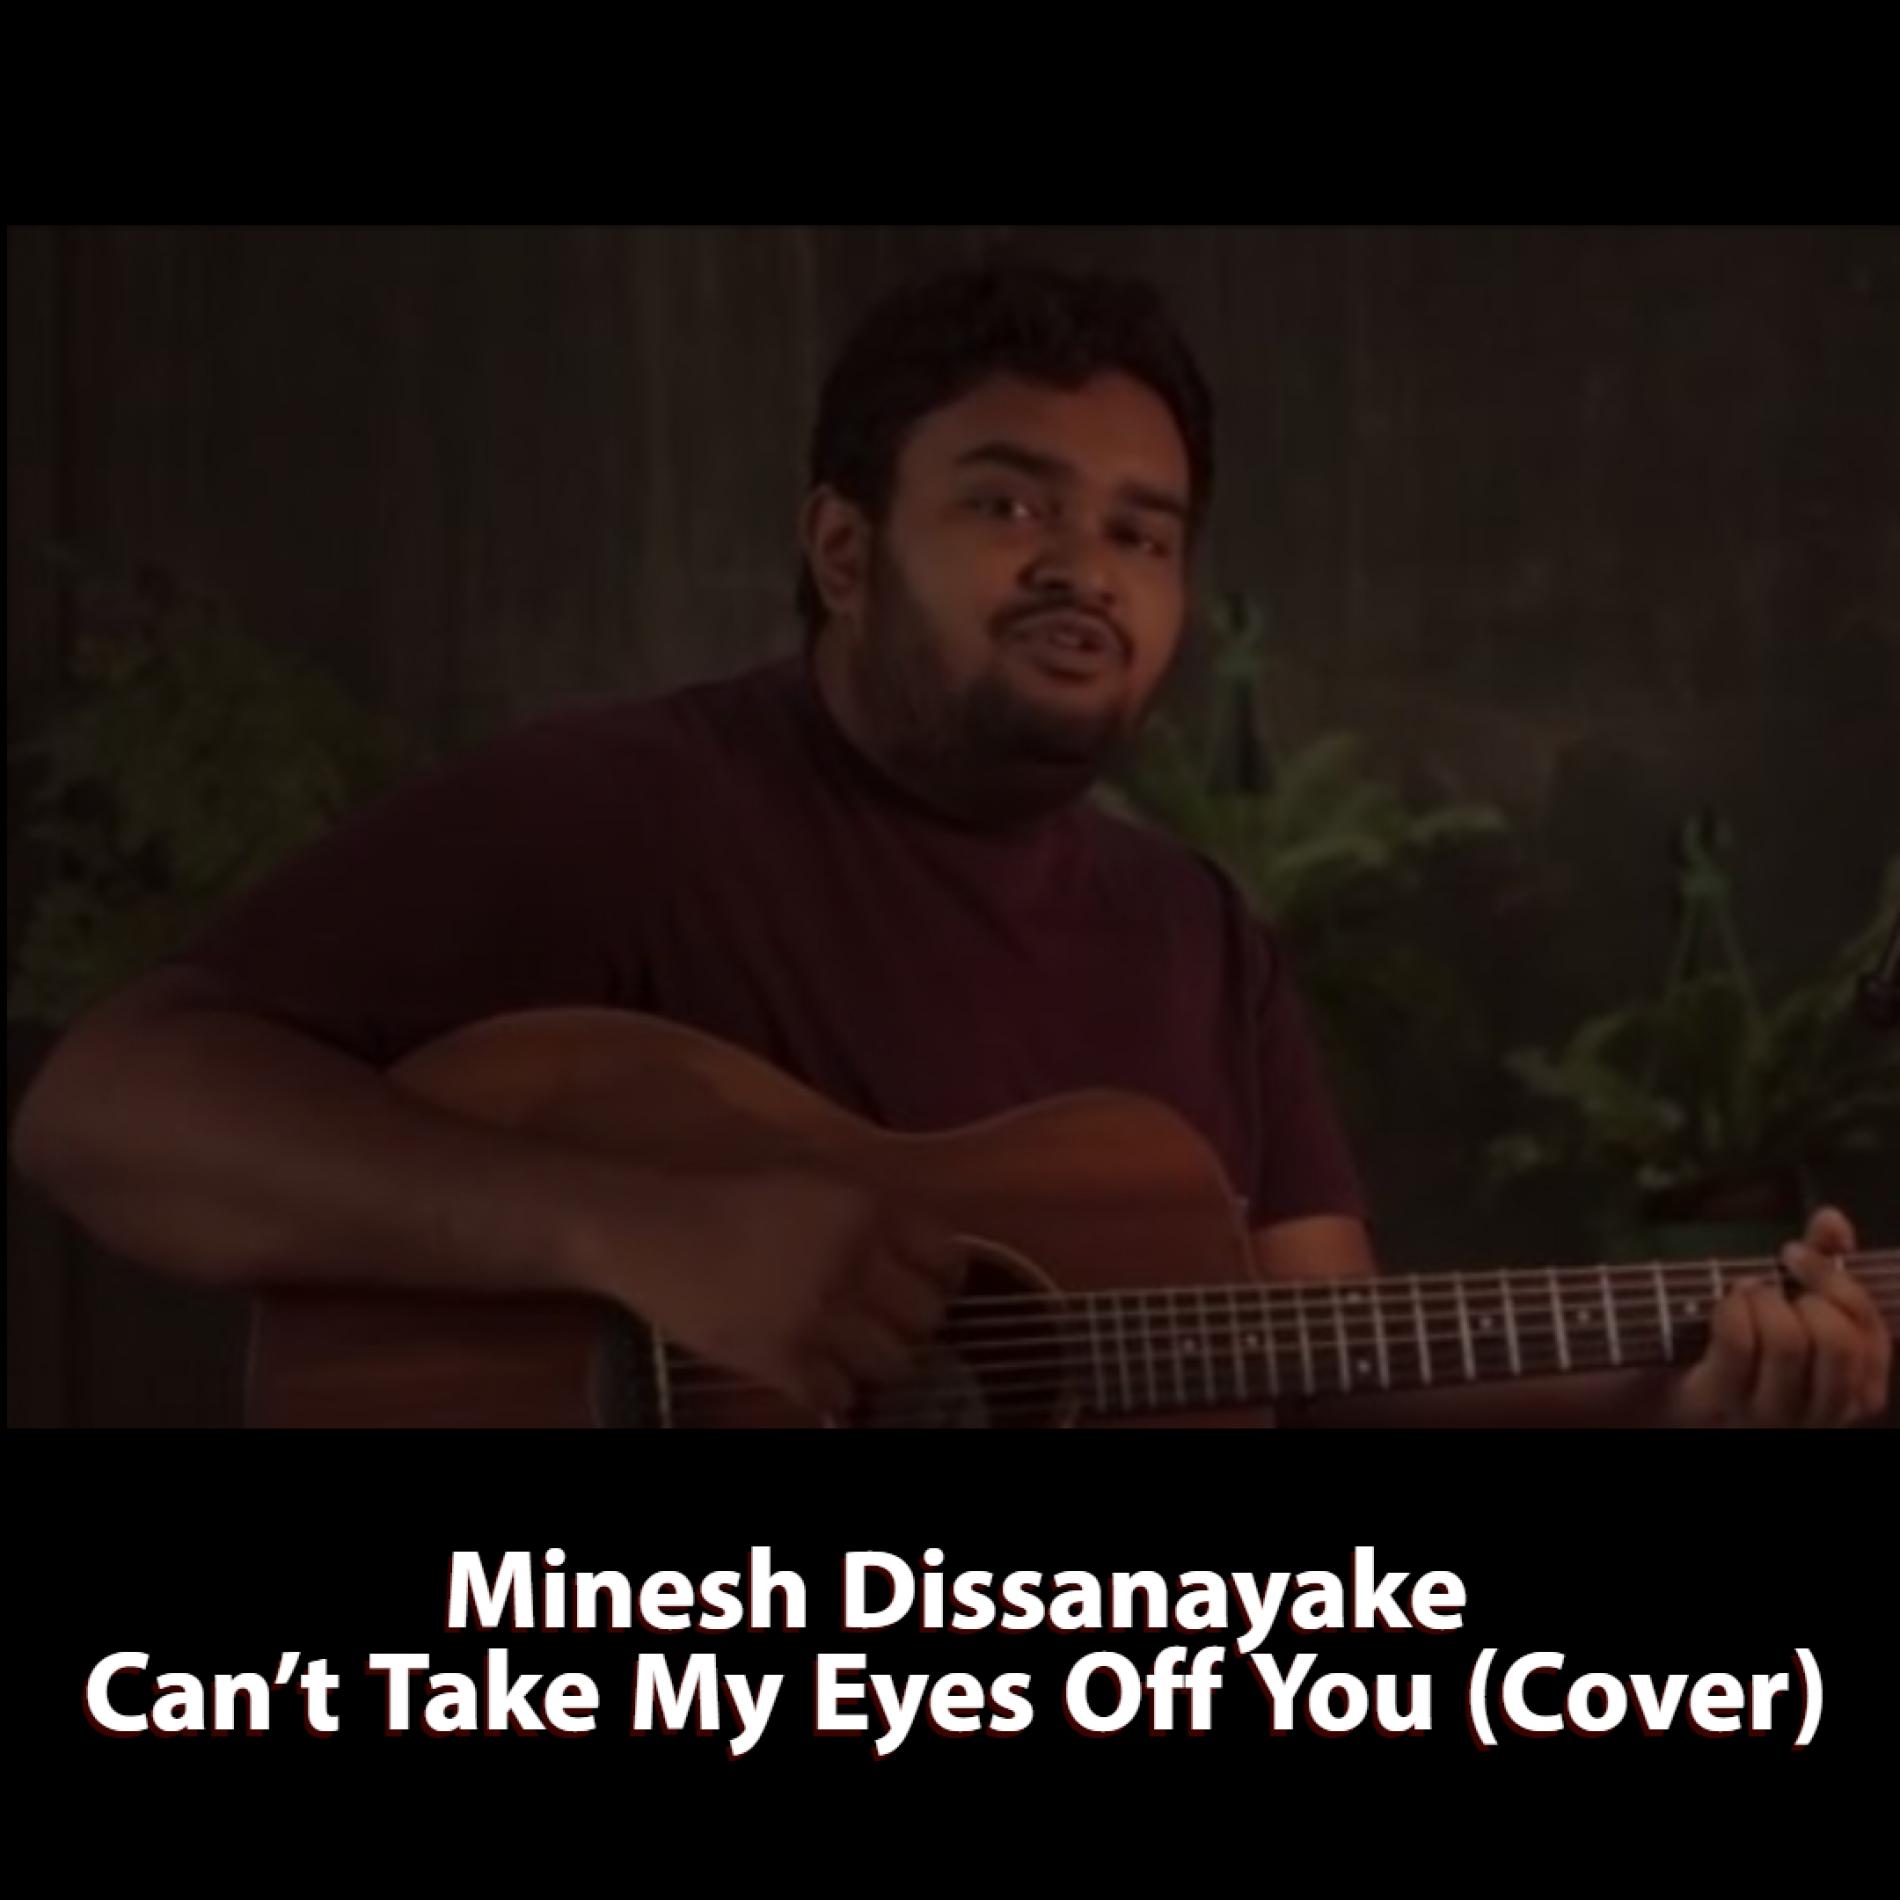 Minesh Dissanayake – Can’t Take My Eyes Off You (Cover)